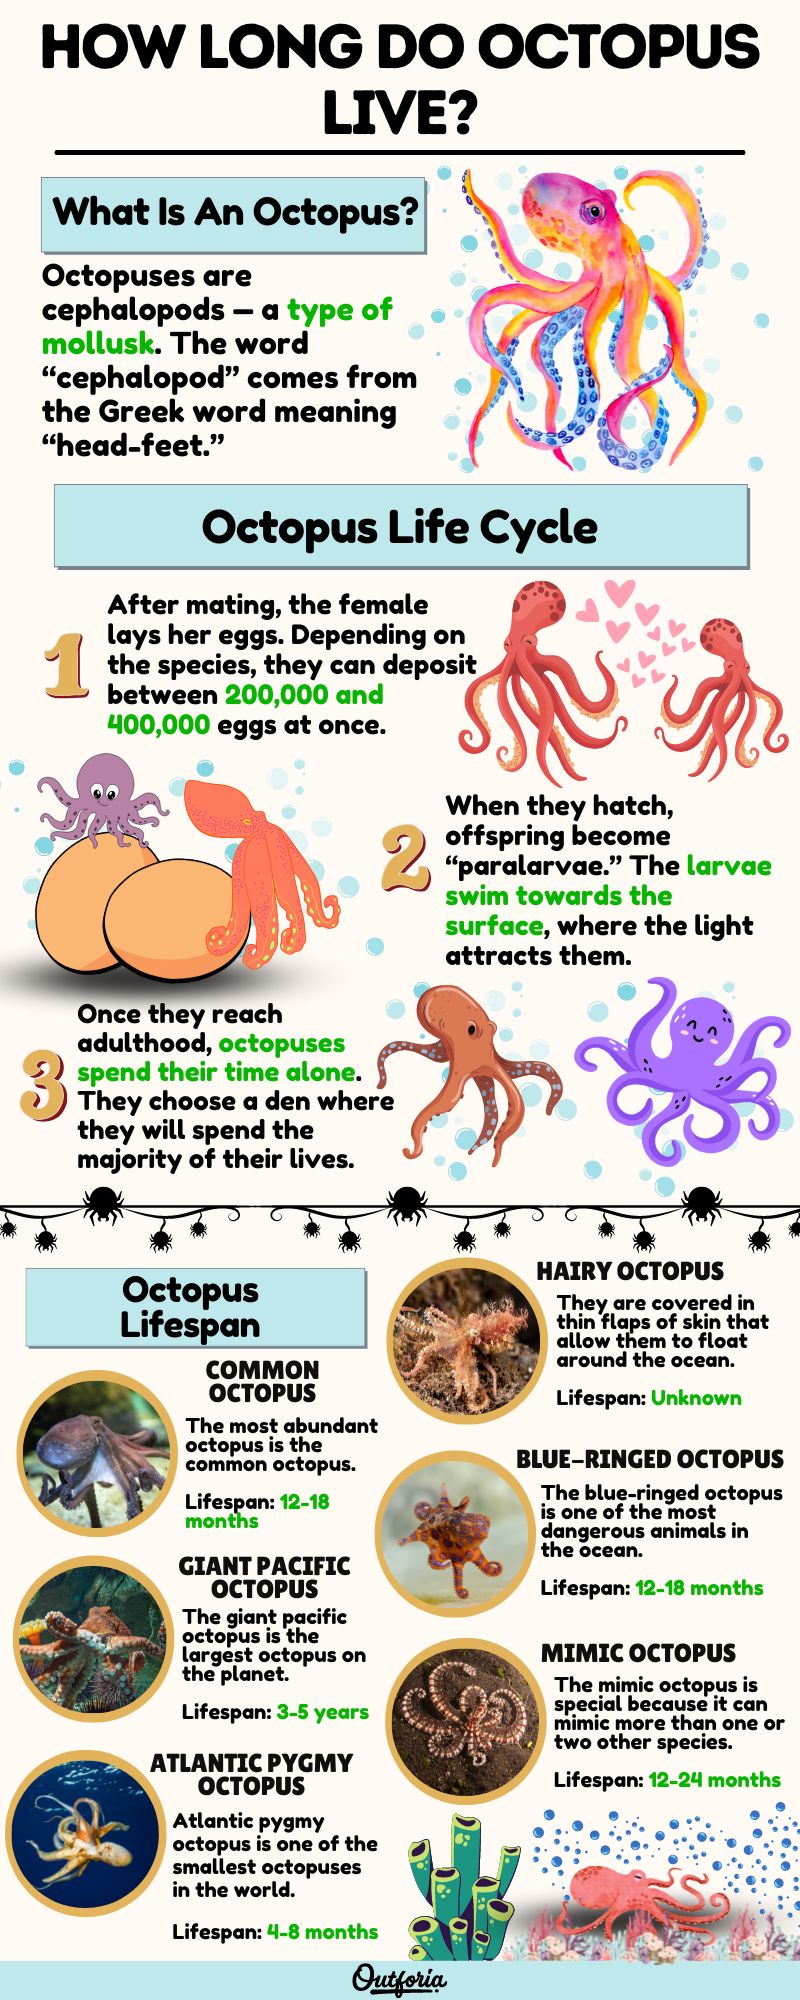 Chart of how long do octopus live complete with facts, pictures, and more